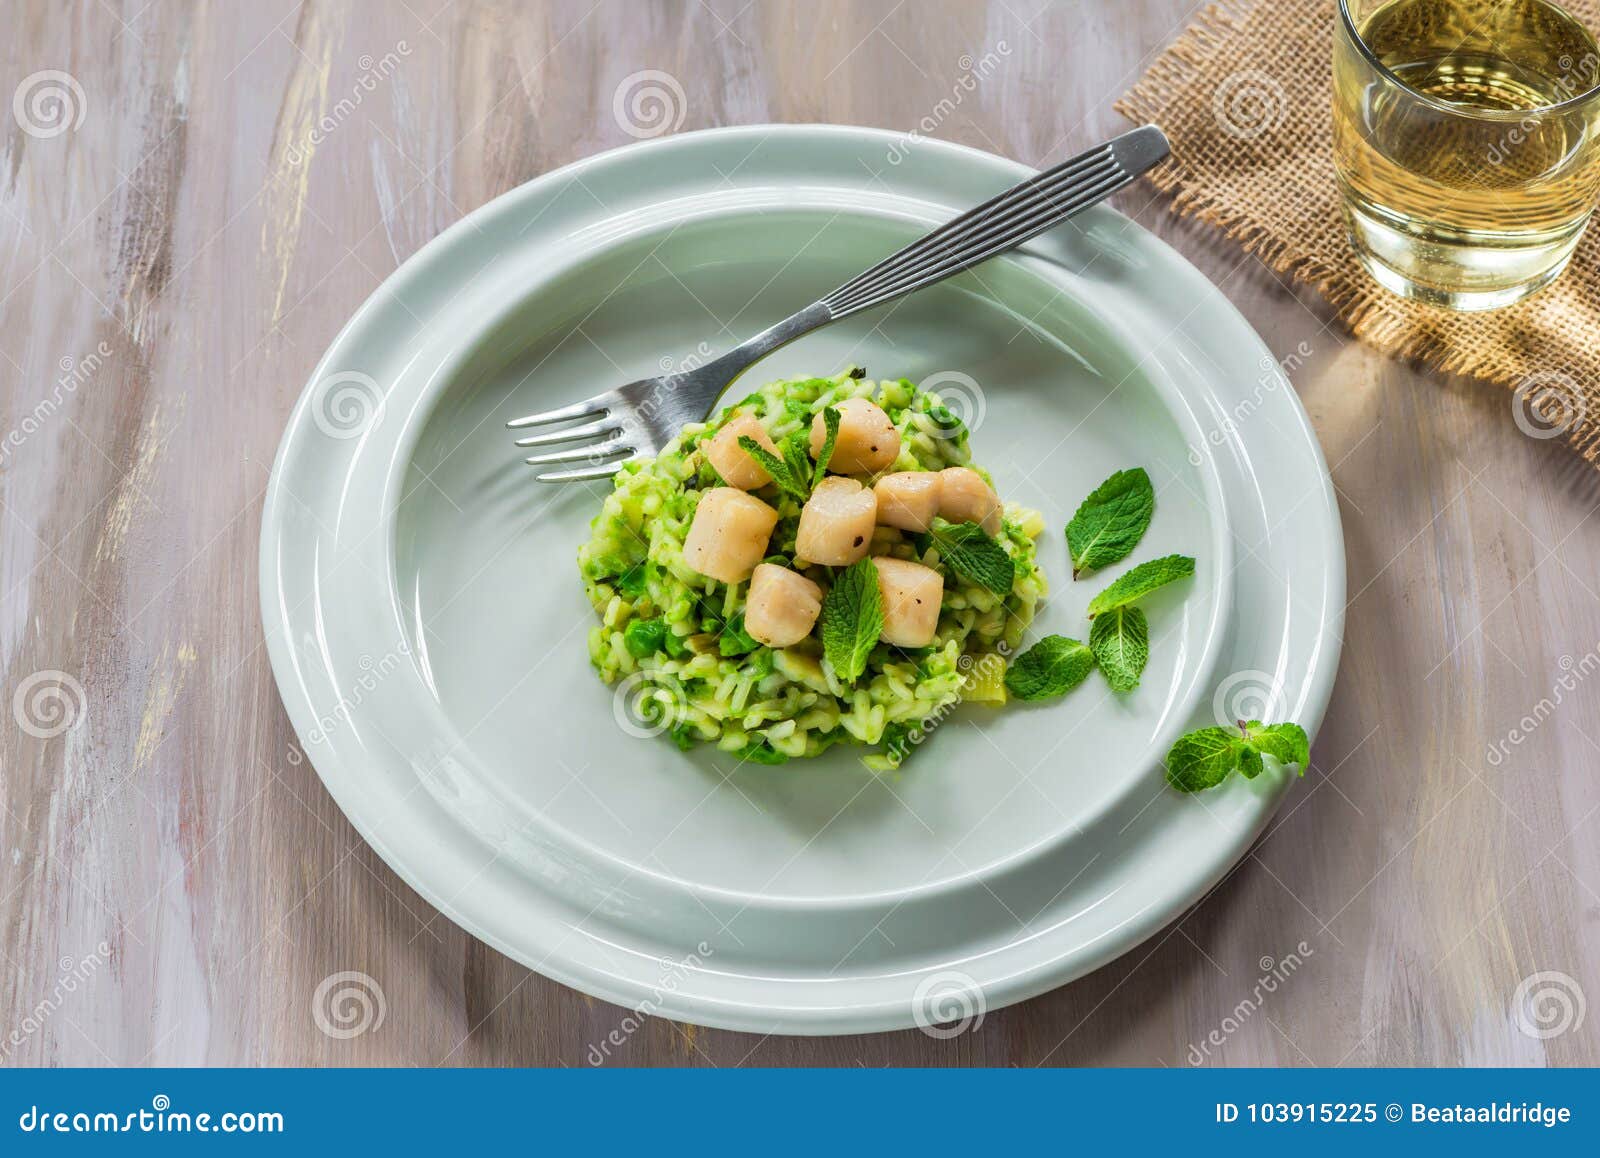 scallops on minted pea risotto